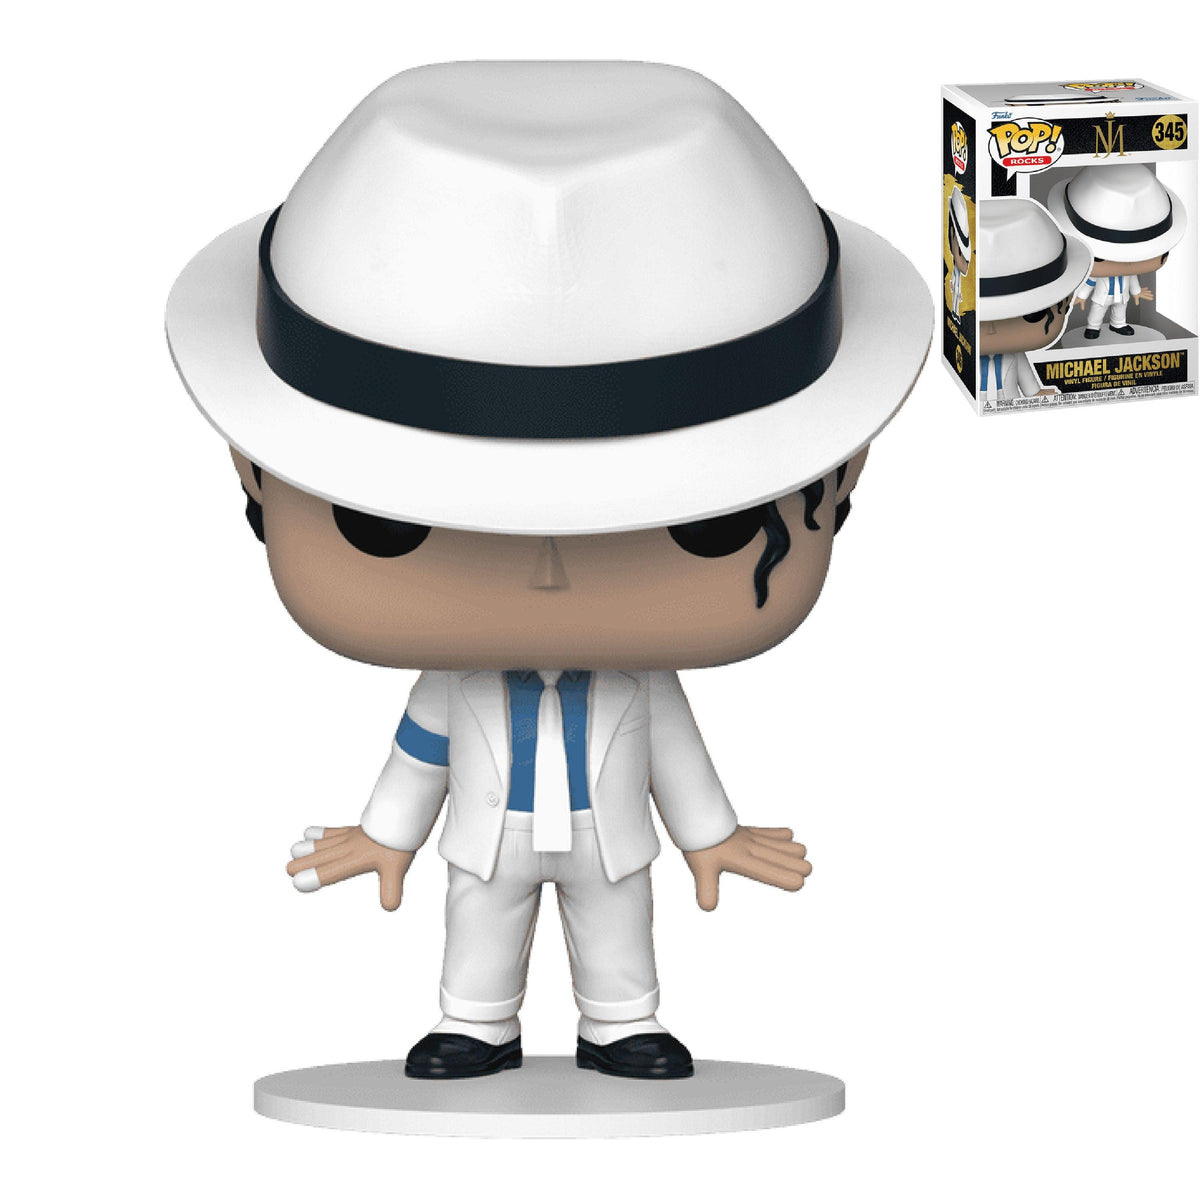 First look at the new Funko Shop exclusive Grammy Michael Jackson